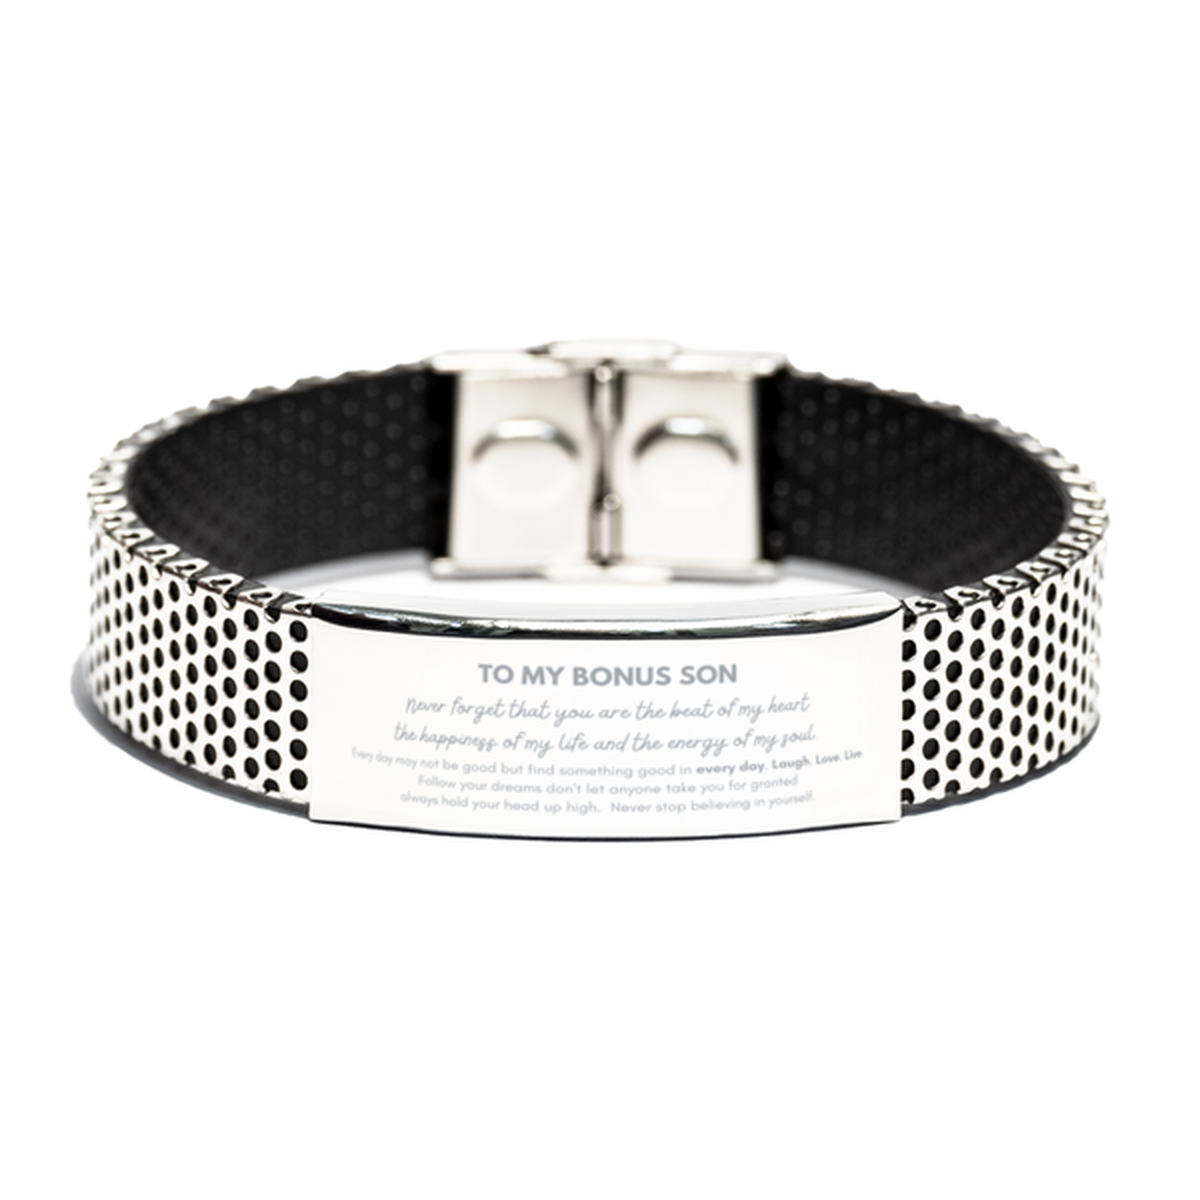 To My Bonus Son Bracelet Gifts, Christmas Bonus Son Stainless Steel Bracelet Present, Birthday Unique Motivational For Bonus Son, To My Bonus Son Never forget that you are the beat of my heart the happiness of my life and the energy of my soul